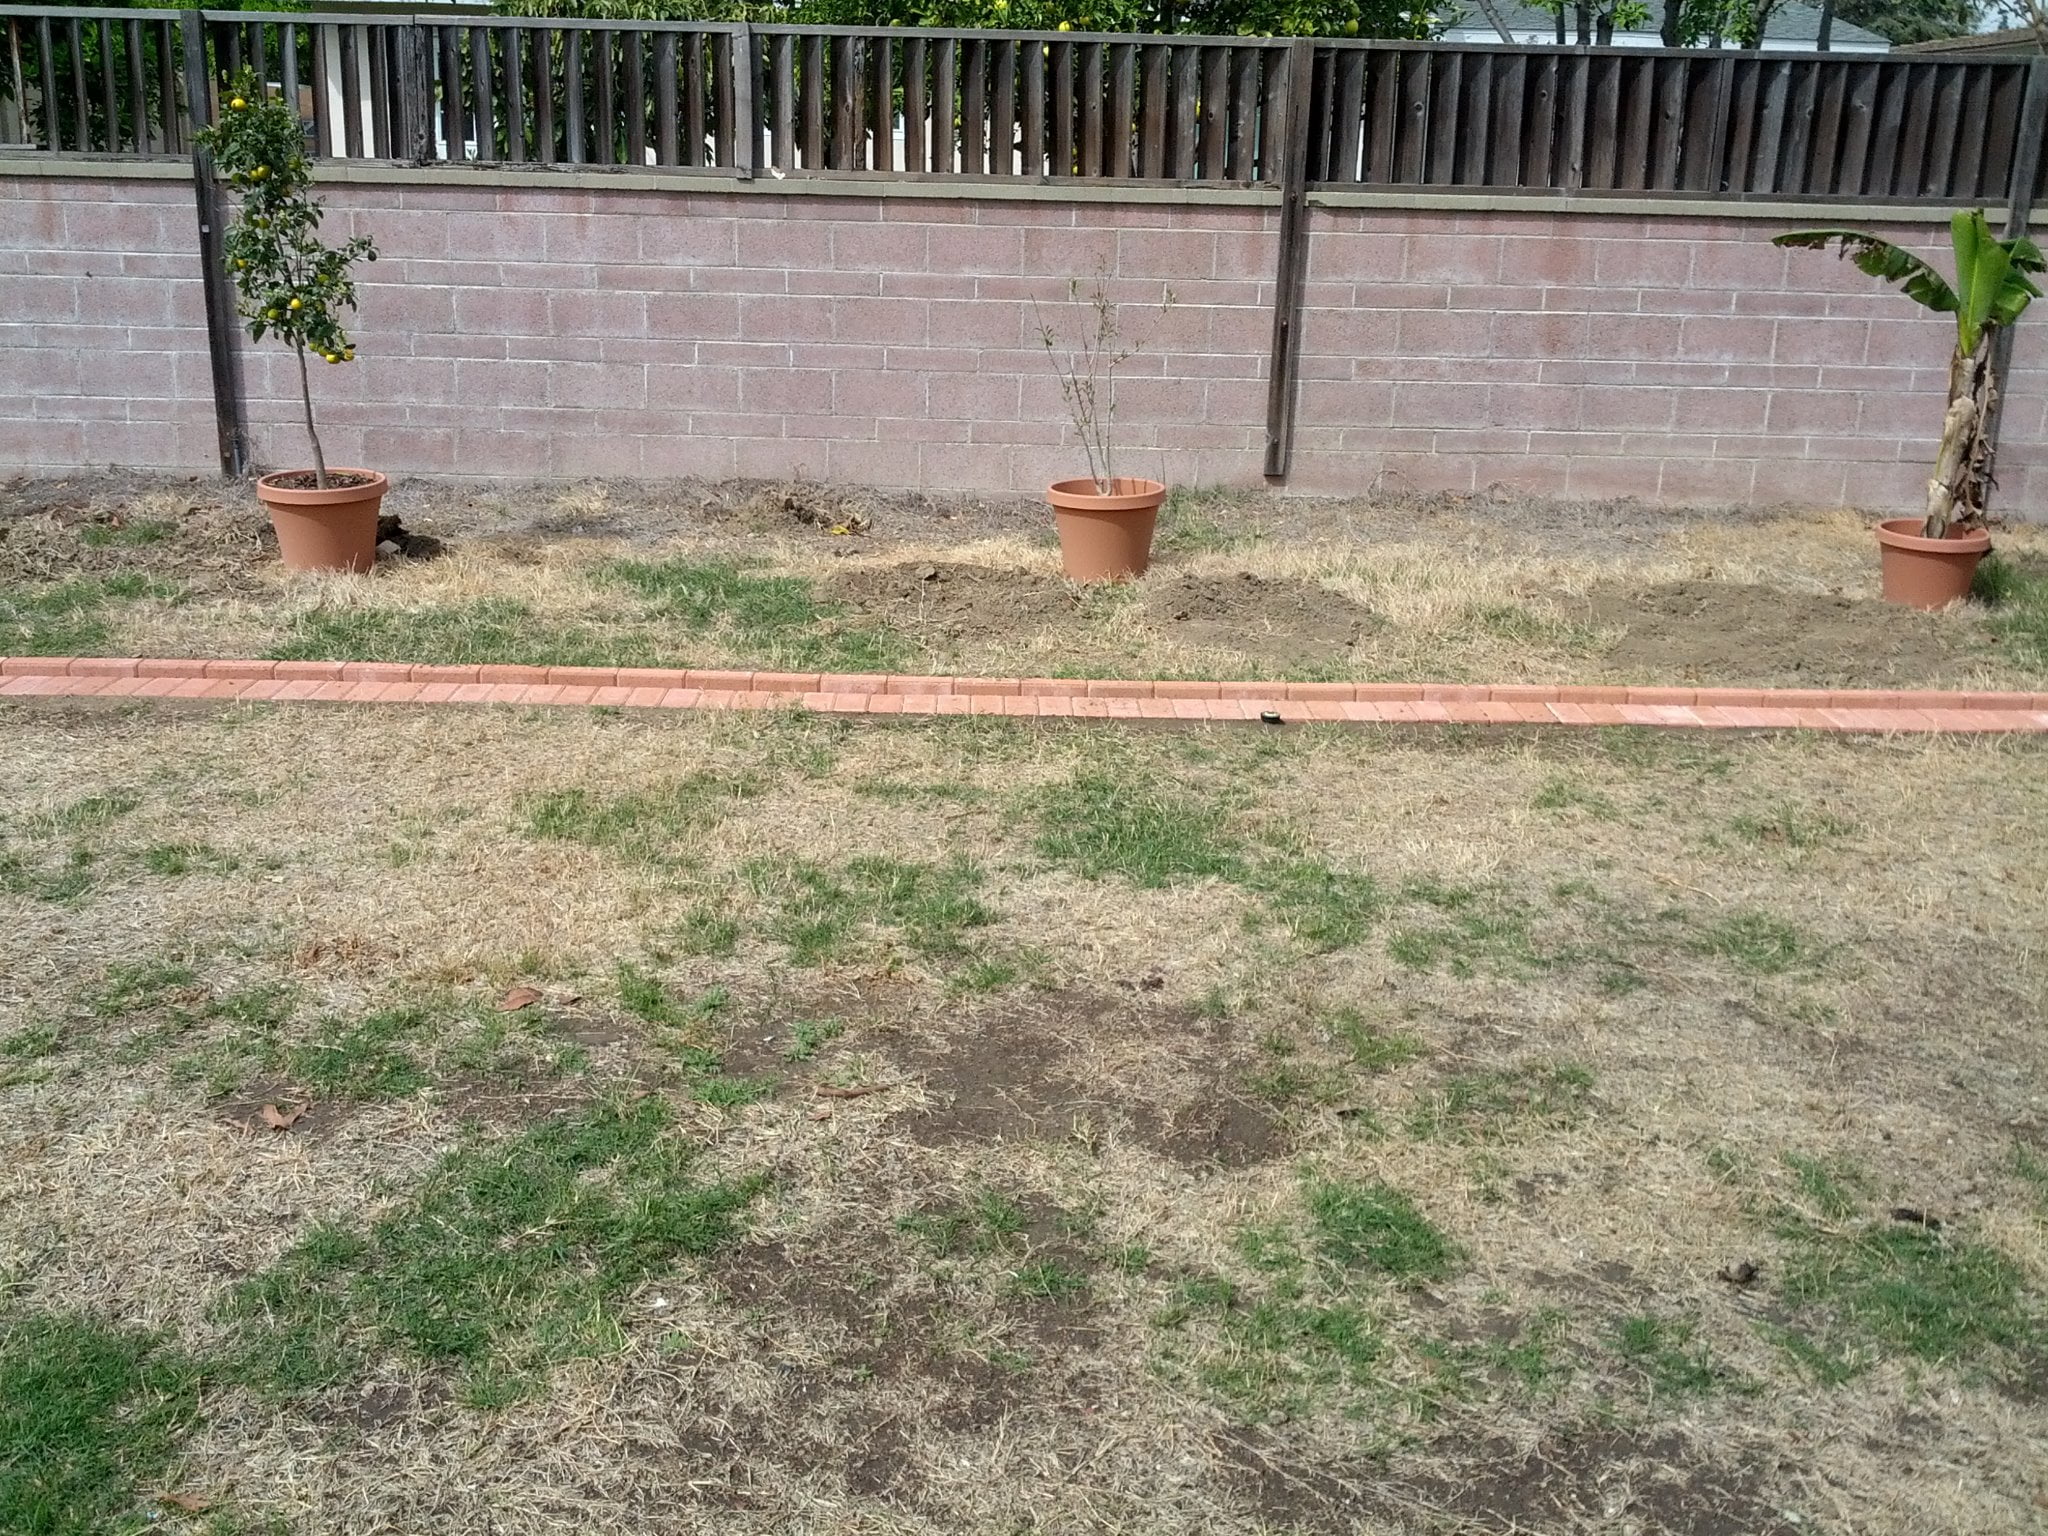 New irrigation and brick lawn edging ... after many...